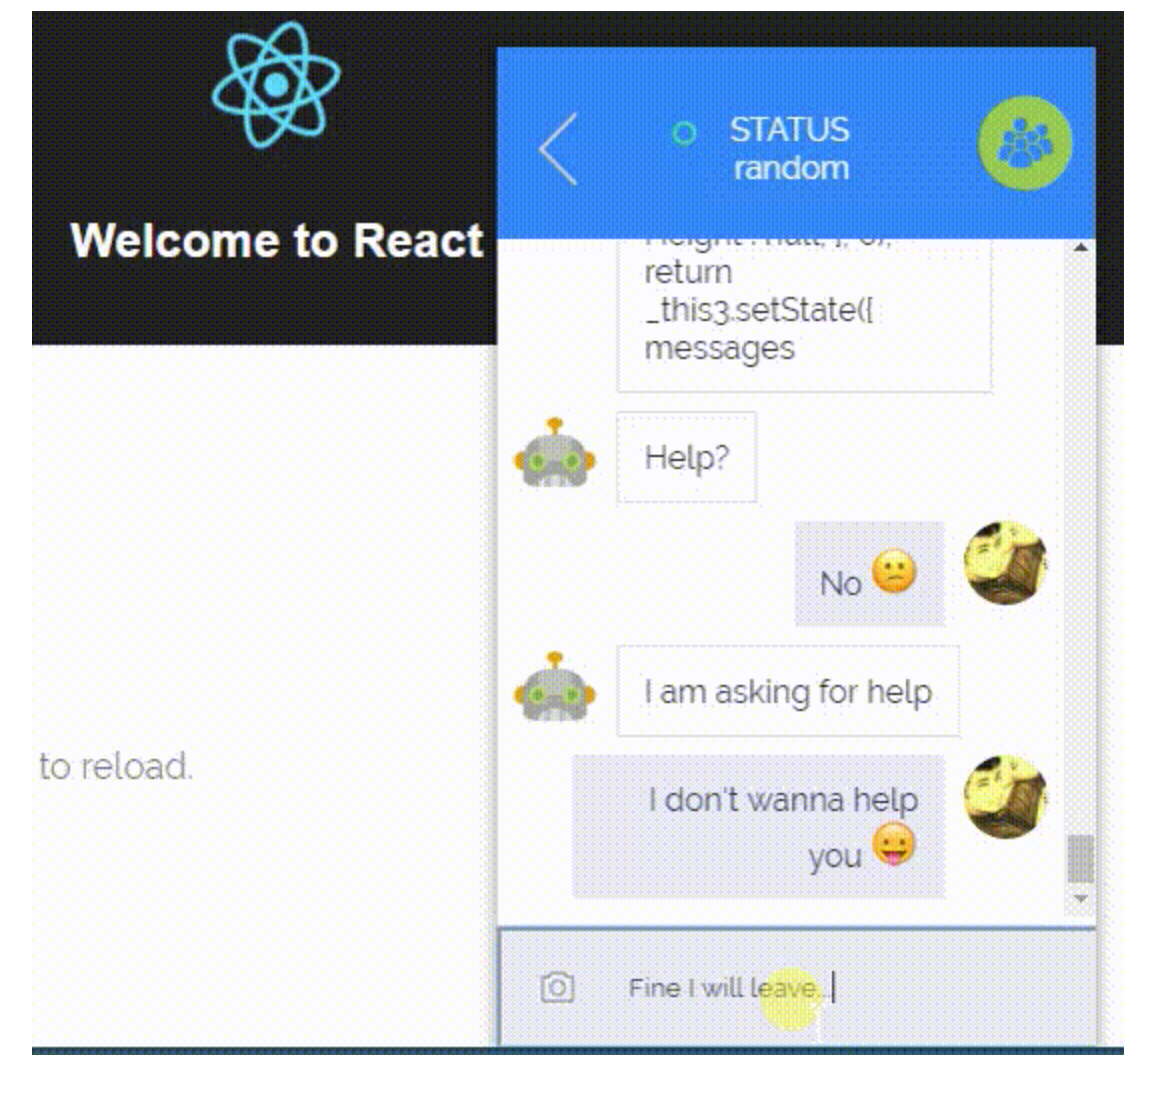 Open Source Live Chat App